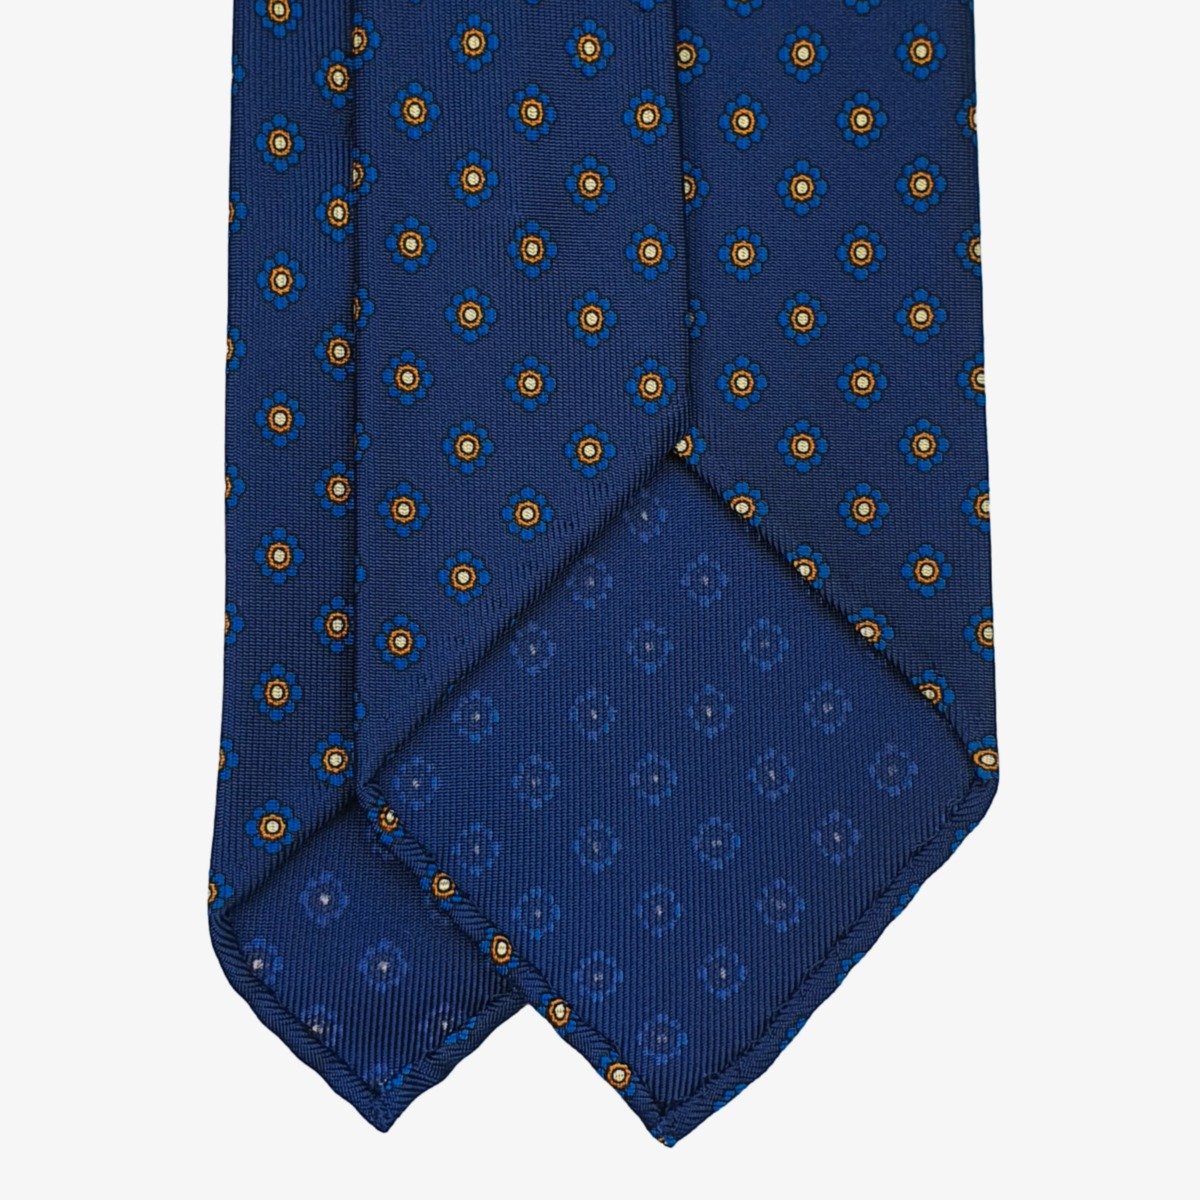 Shibumi Firenze blue silk tie with yellow floral pattern